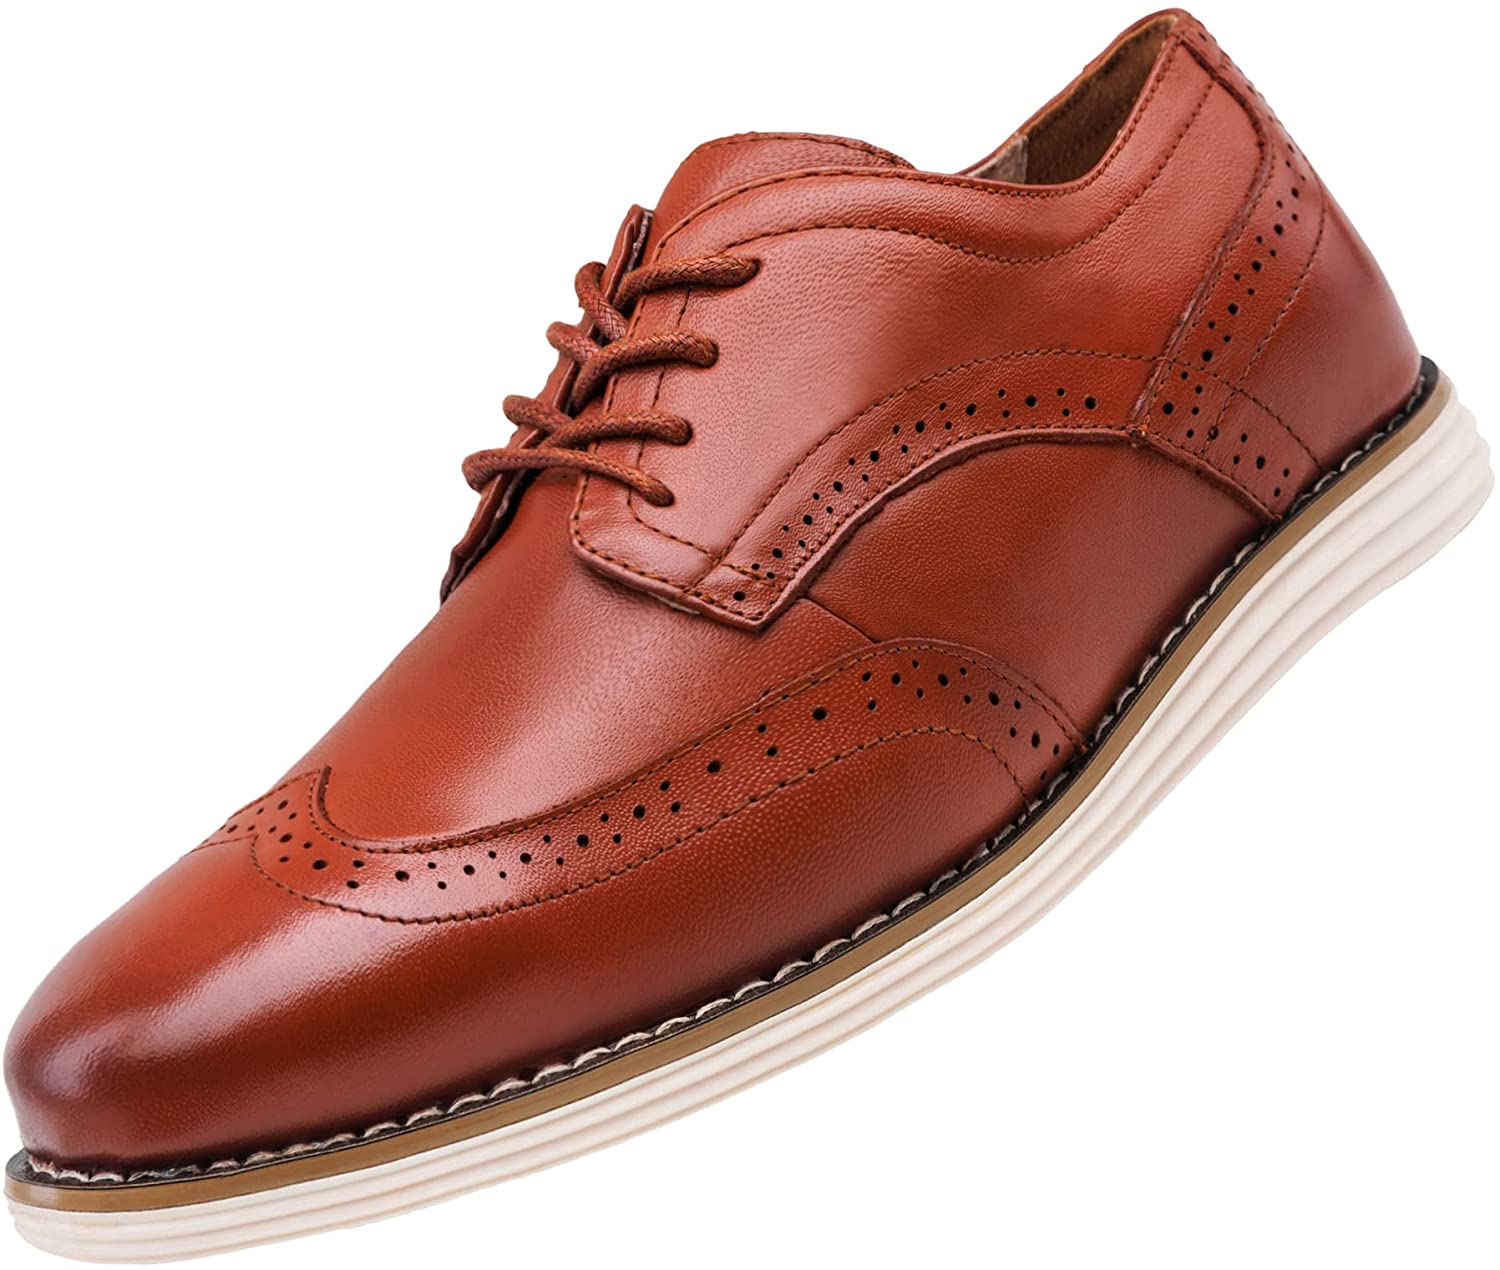 Details about   Mens Business Leisure Leather Shoes Brogue Wing Tip Carved Pointy Toe Oxfords D 